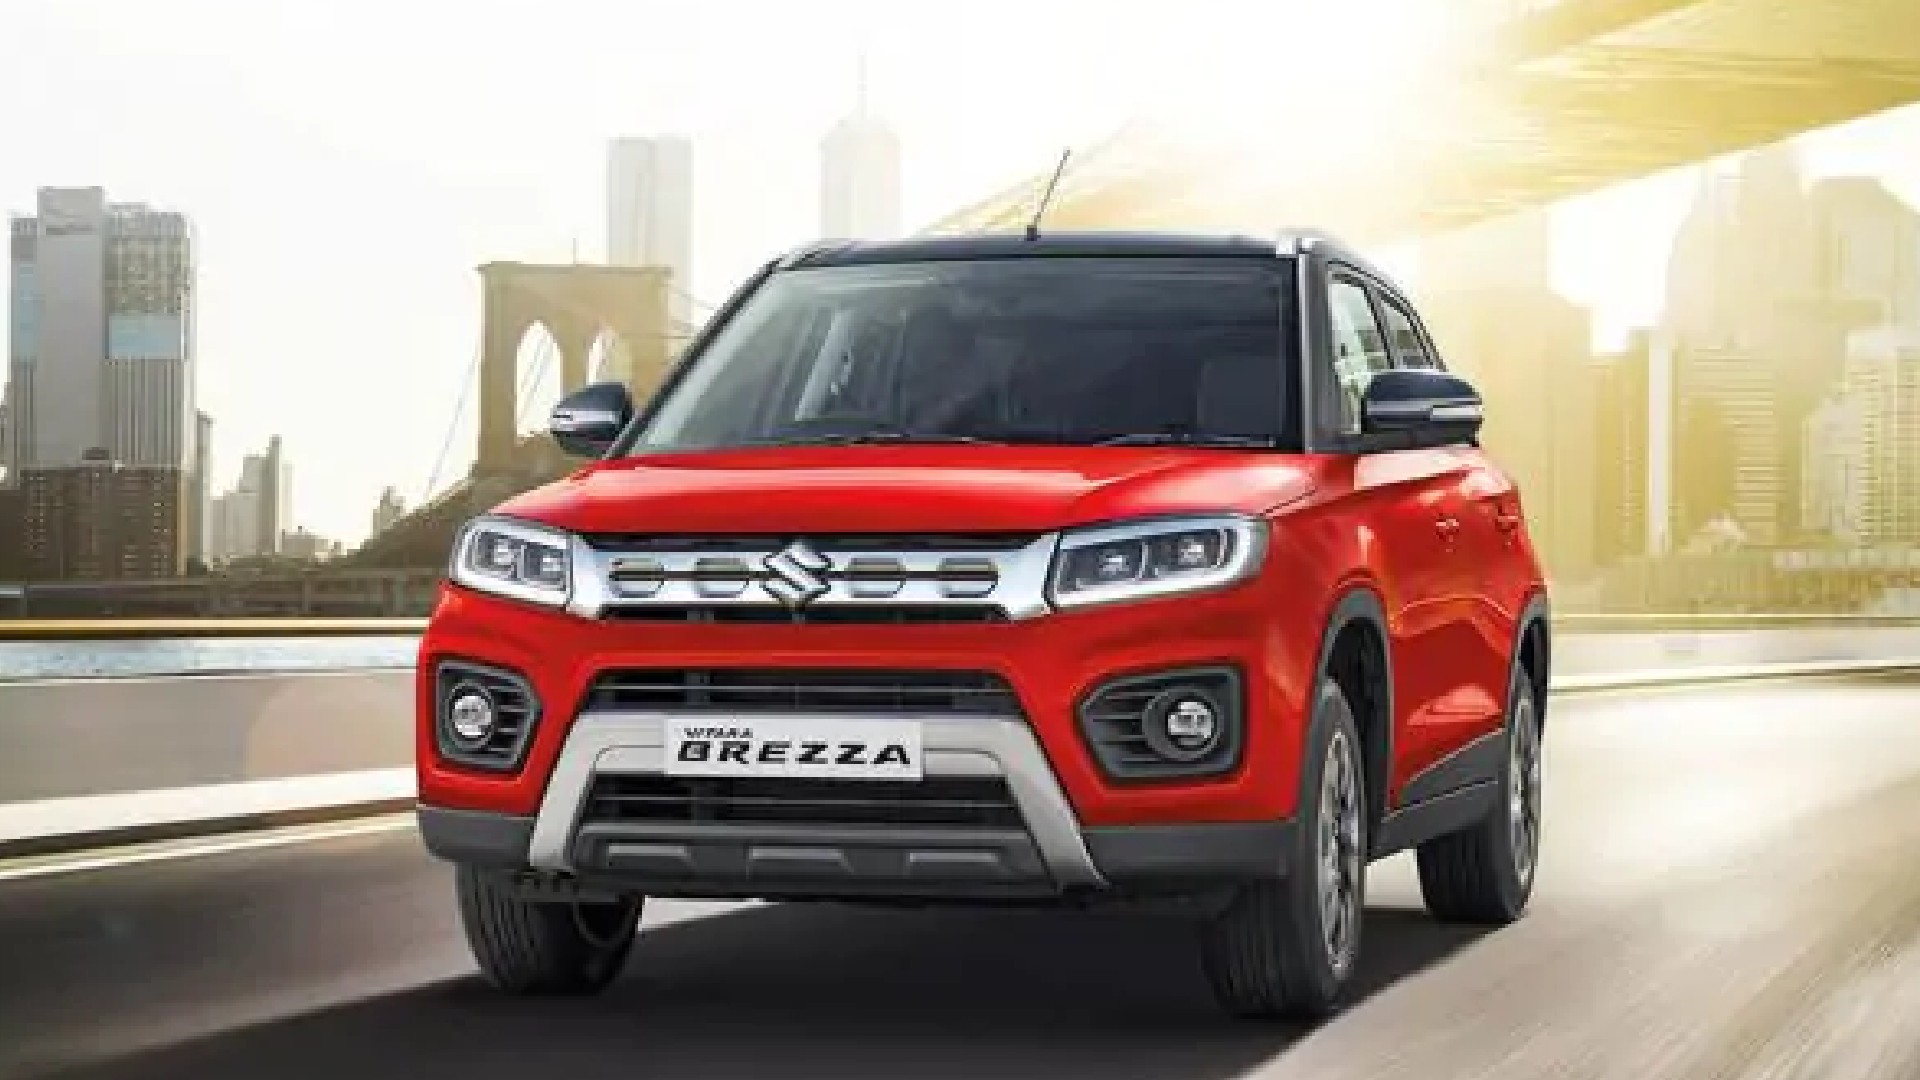 Maruti Launching Rs 9 Lakh SUV In India? What Is The Truth?